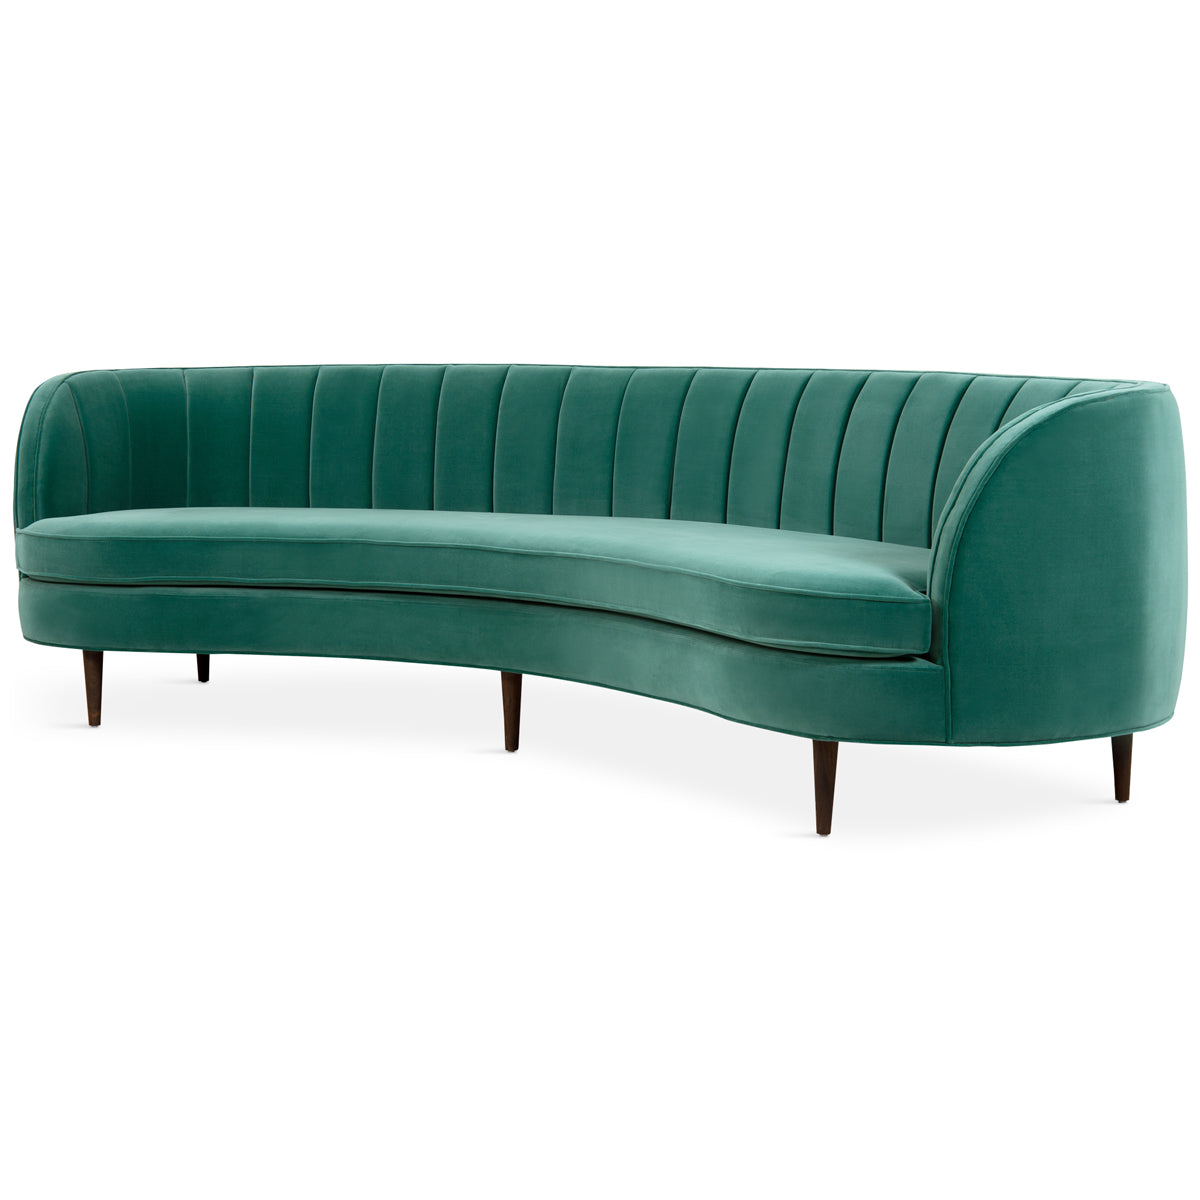 St. Tropez 2 Curved Sofa with Channel Tufting - ModShop1.com